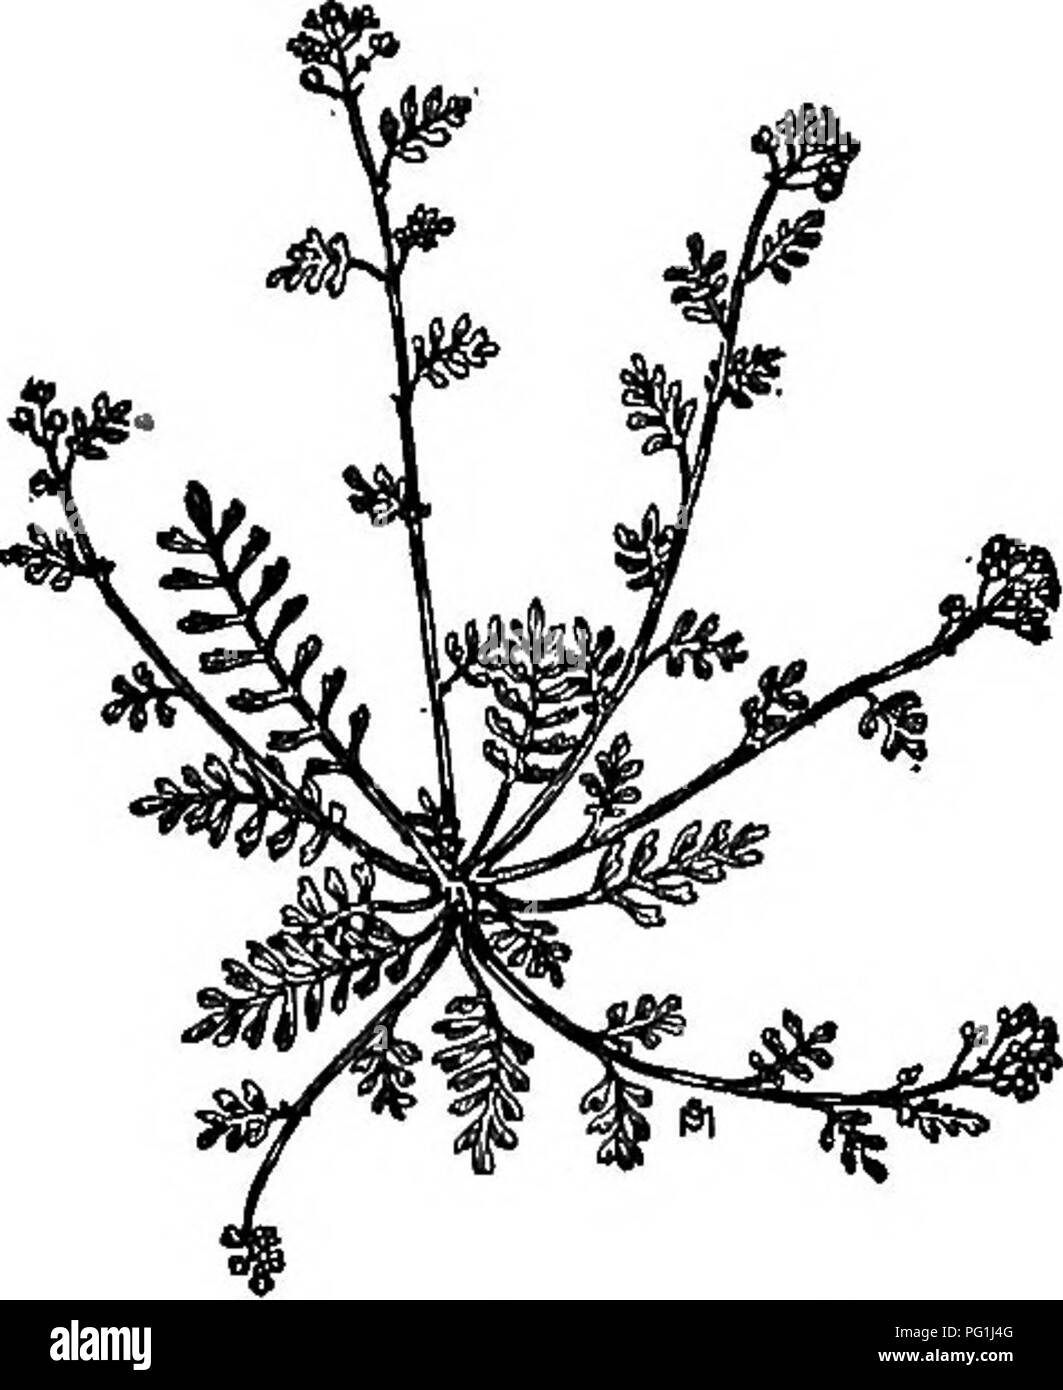 . A manual of weeds : with descriptions of all the most pernicious and troublesome plants in the United States and Canada, their habits of growth and distribution, with methods of control . Weeds. CRUCIFERAE {MUSTARD FAMILY) 179 Means of control Infested grain fields and meadows should be sprayed with Iron sulfate or Copper sulfate before the first flowers mature. Stubbles should be cultivated after harvest in order .to destroy autumn seedlings. SWINE CRESS Cordnopus didymus, Sm., (Senebiera didyma, Pers.) Other English names: Lesser Wart Cress, Carpet Cress. Introduced. Annual or biennial. Pr Stock Photo